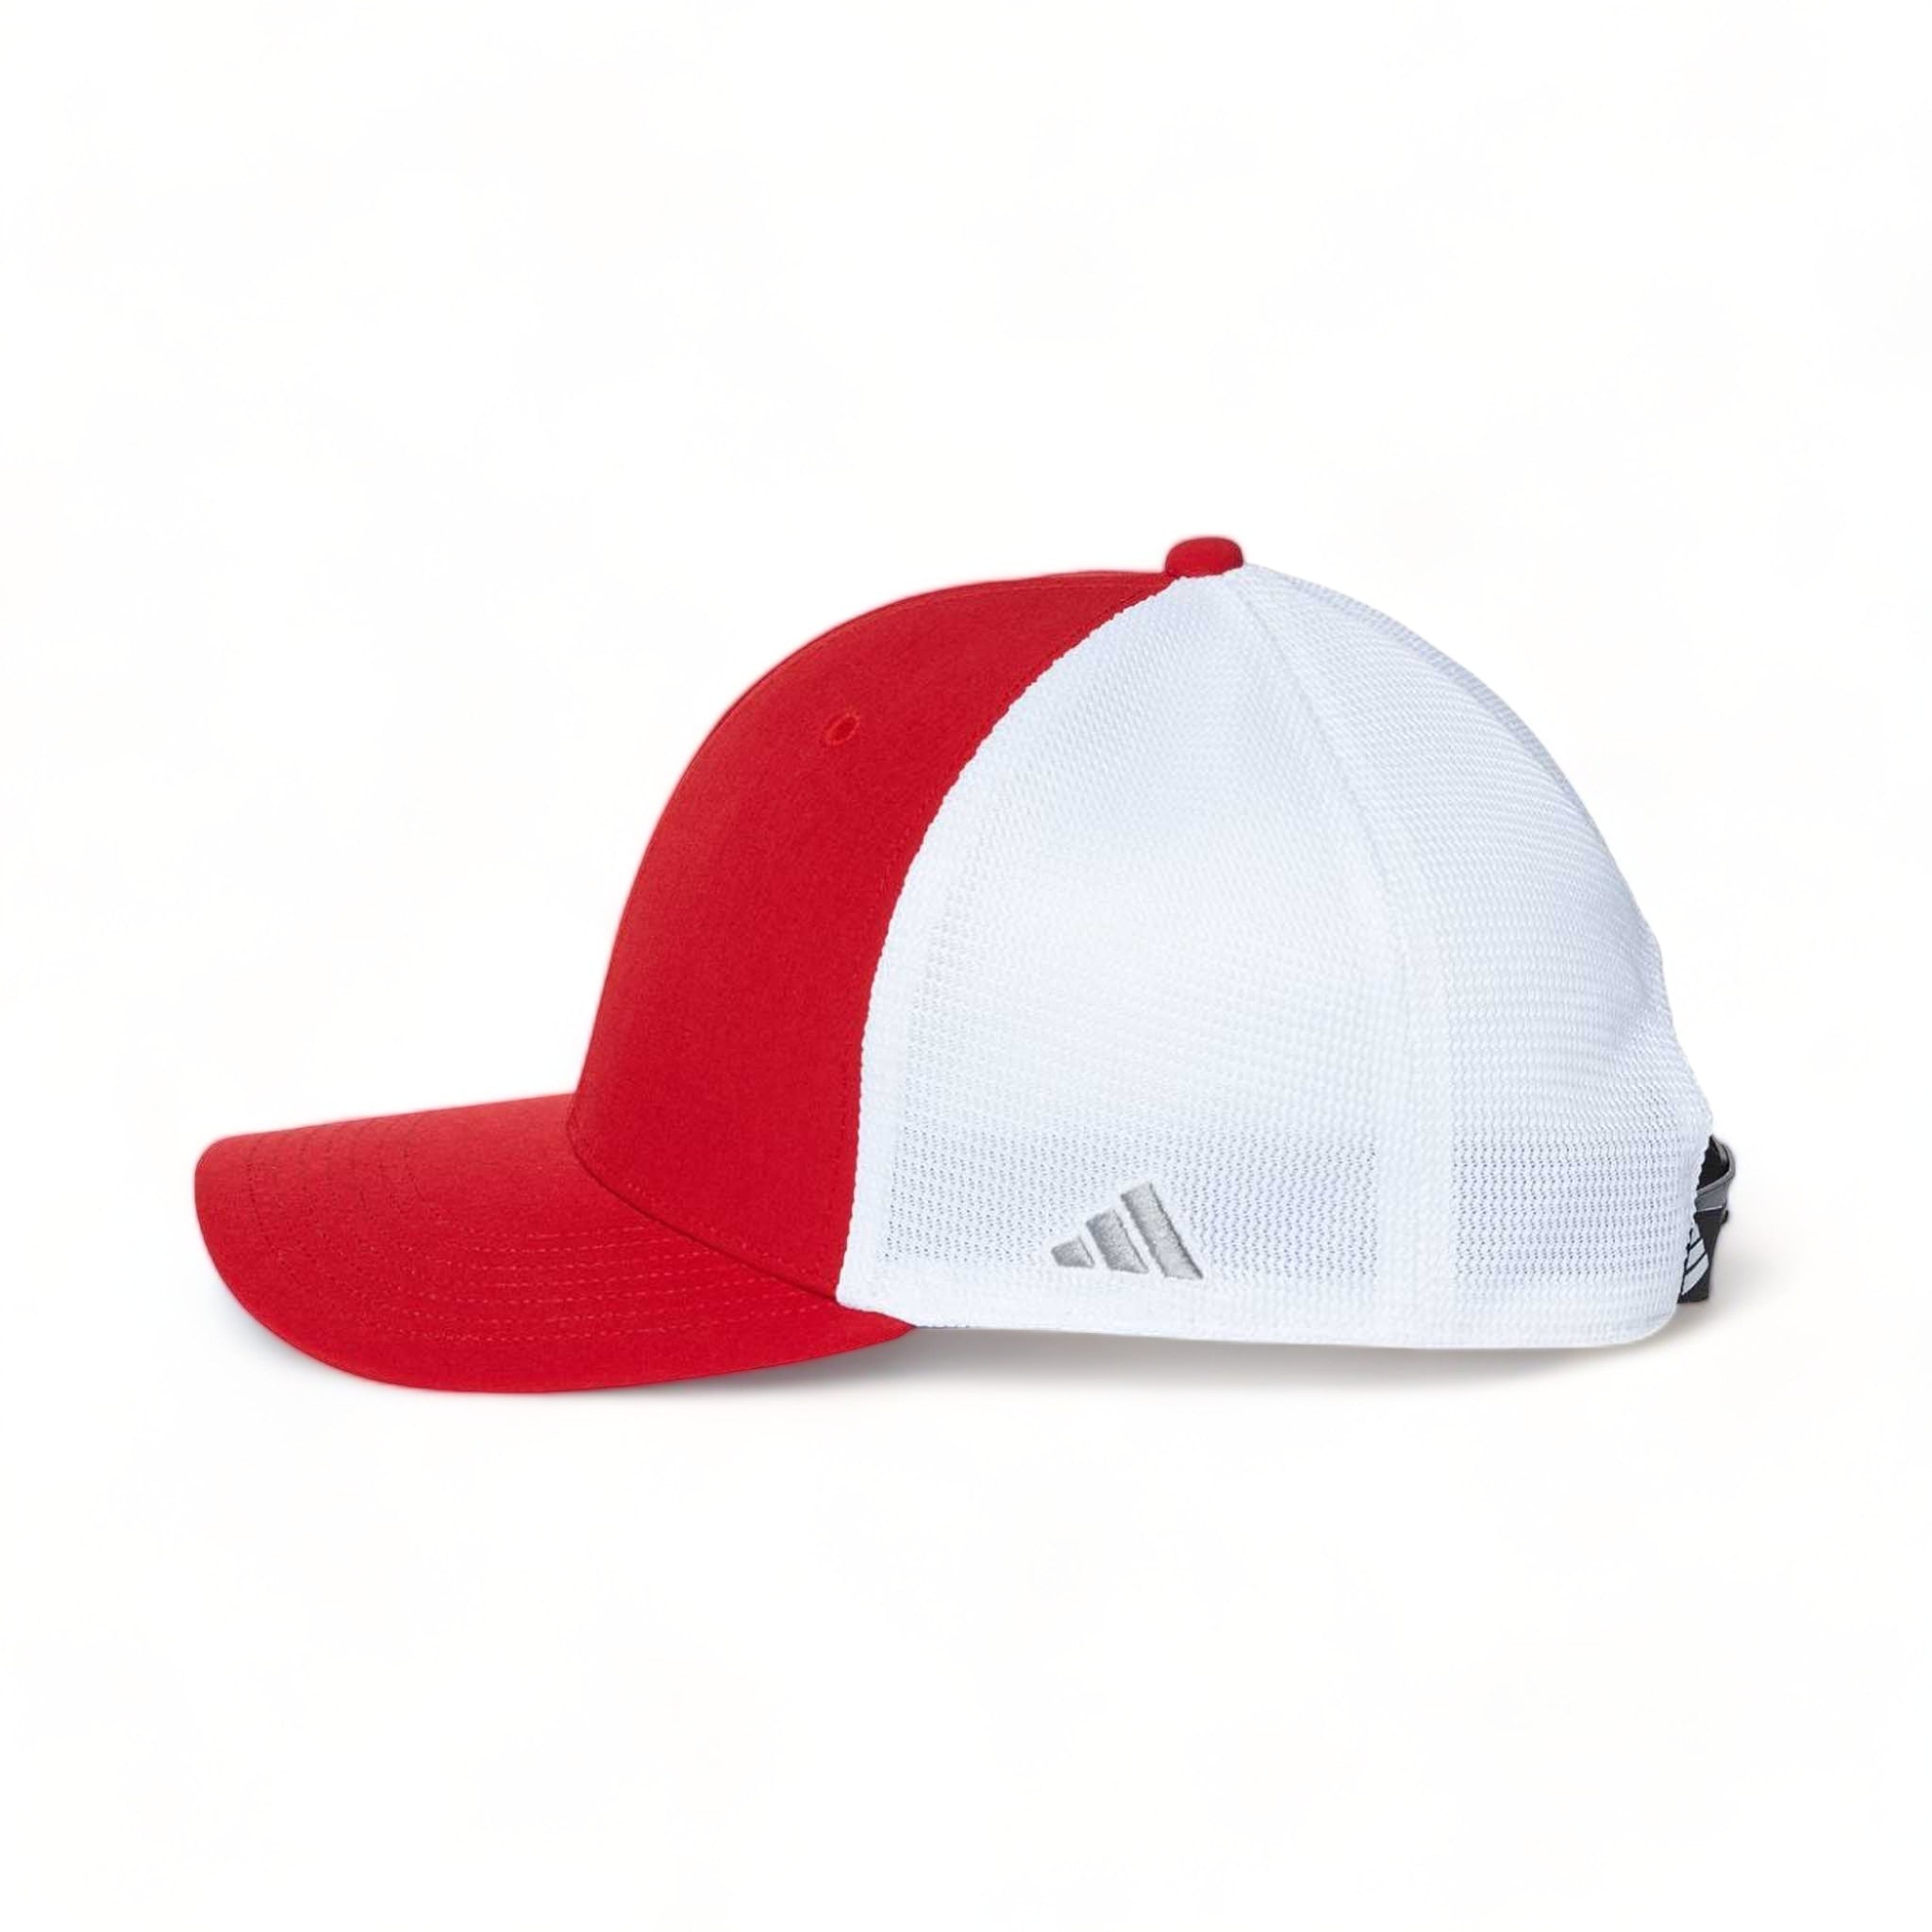 Side view of Adidas A627S custom hat in power red